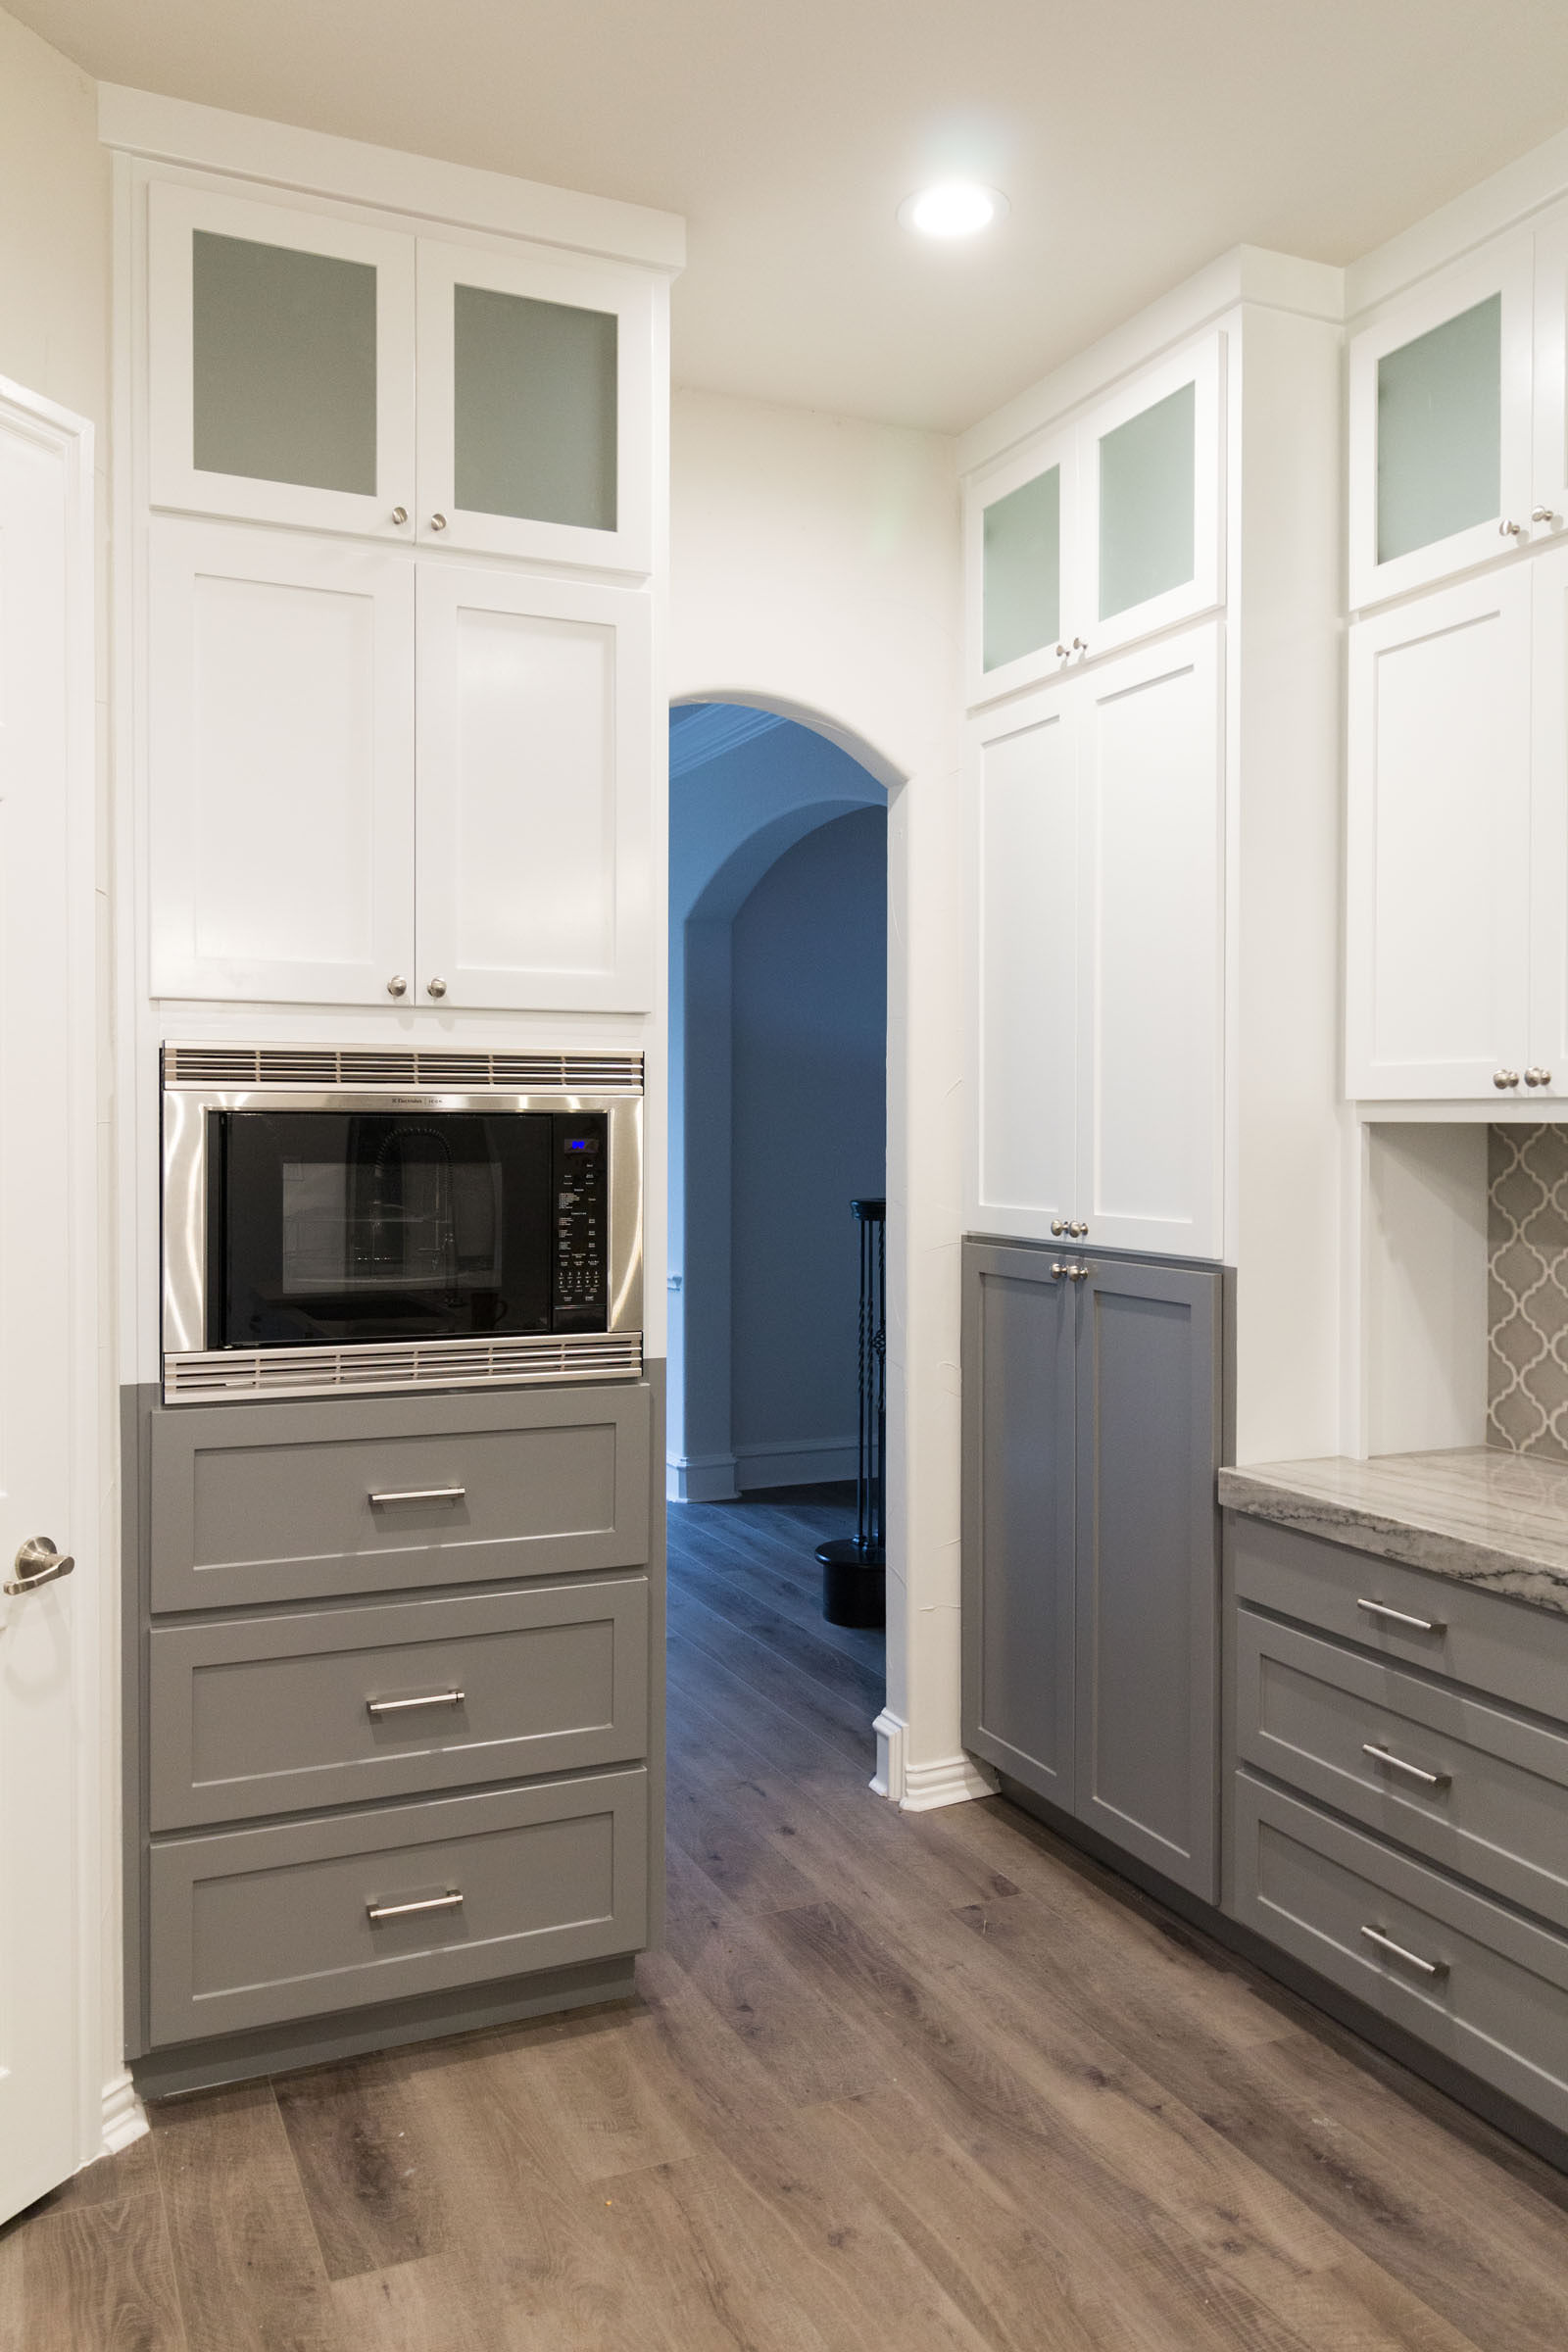 Contemporary kitchen remodel with grey and white cabinets, frosted glass, arabesque tile